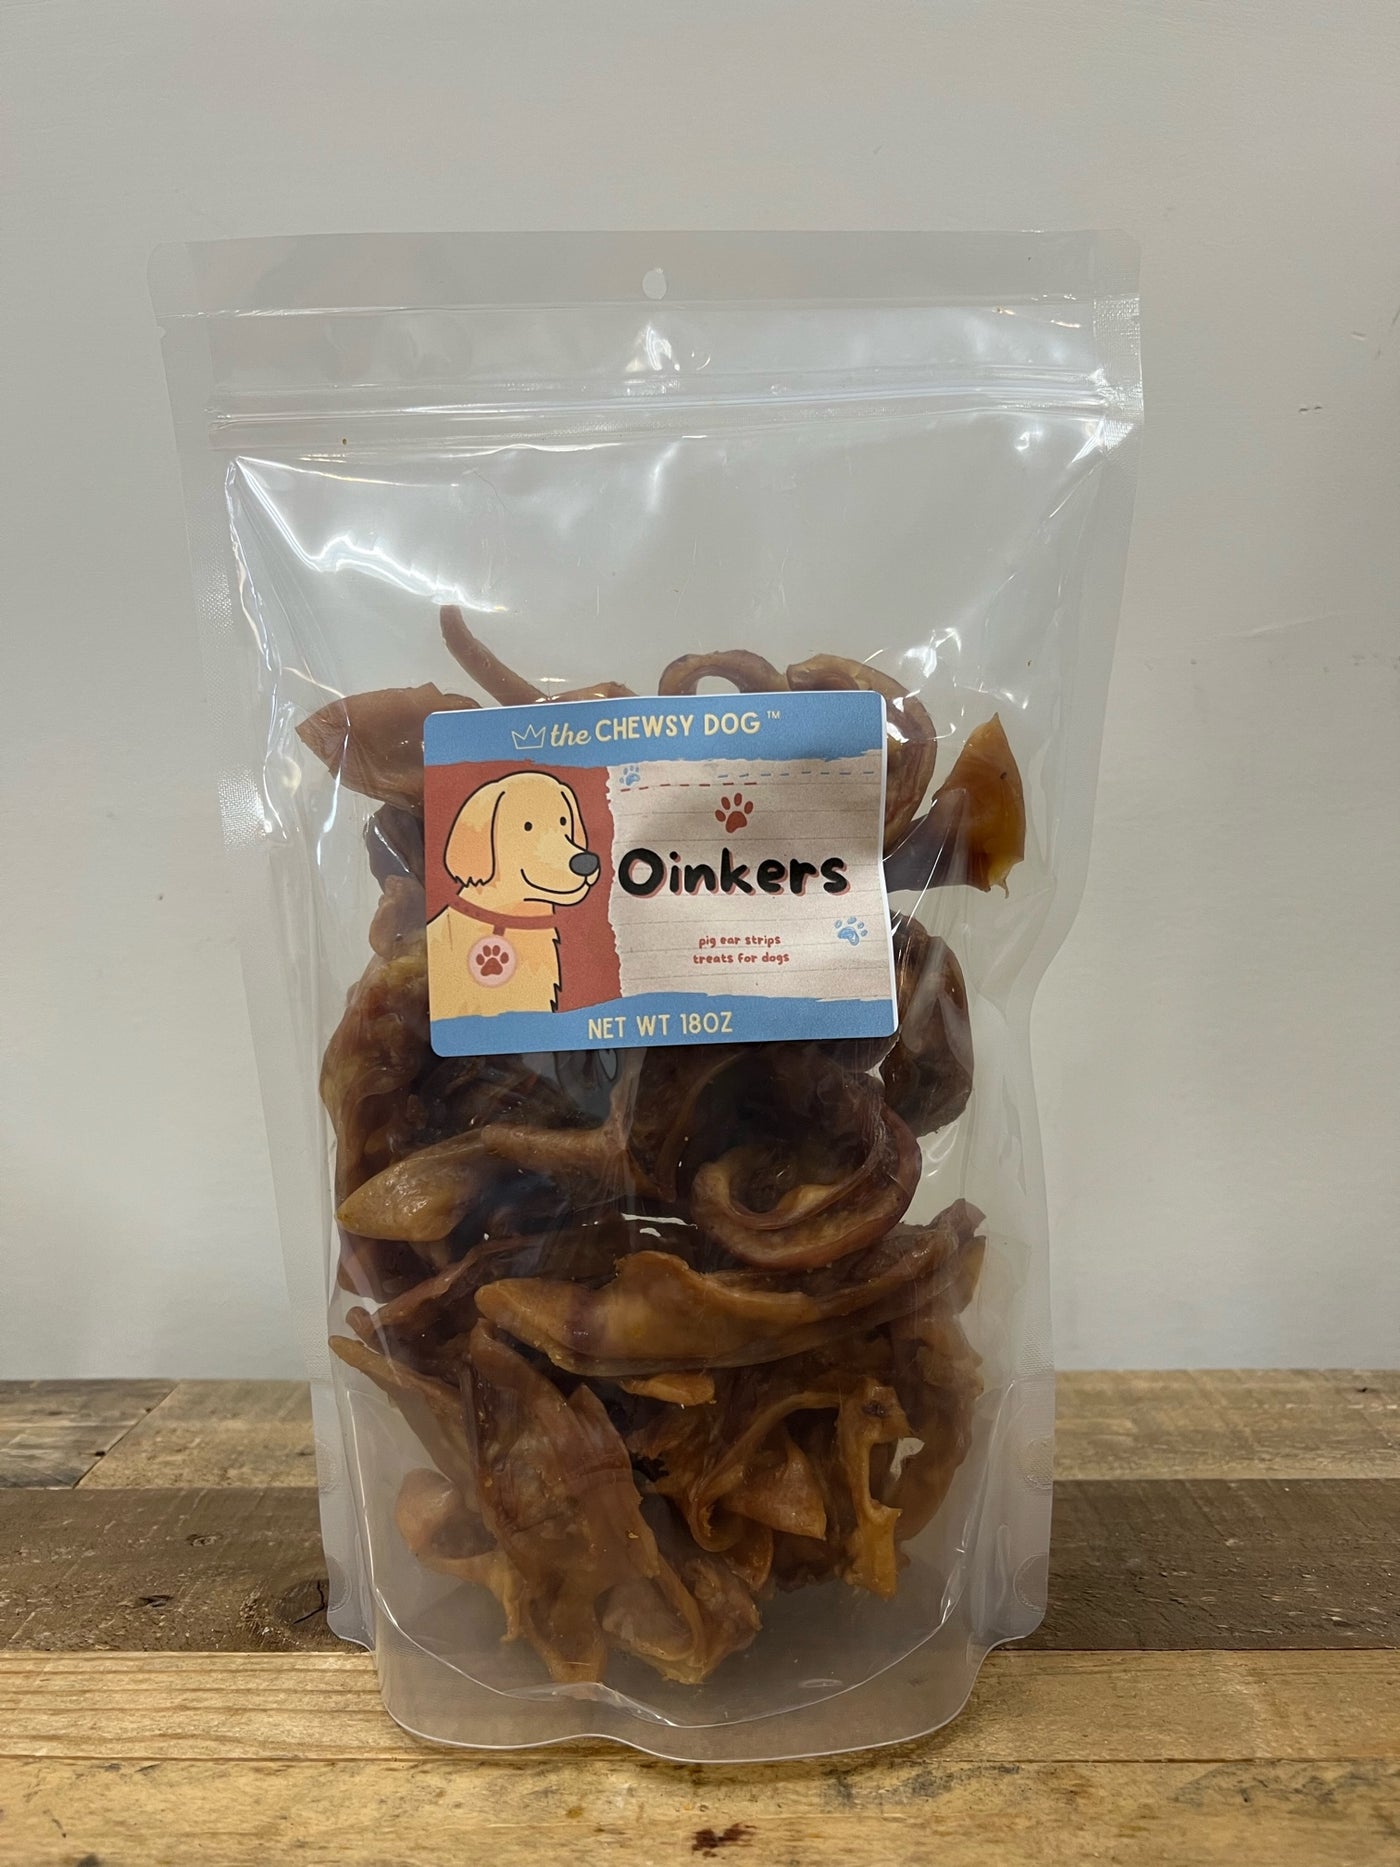 The Chewsy Dog Oinkers *